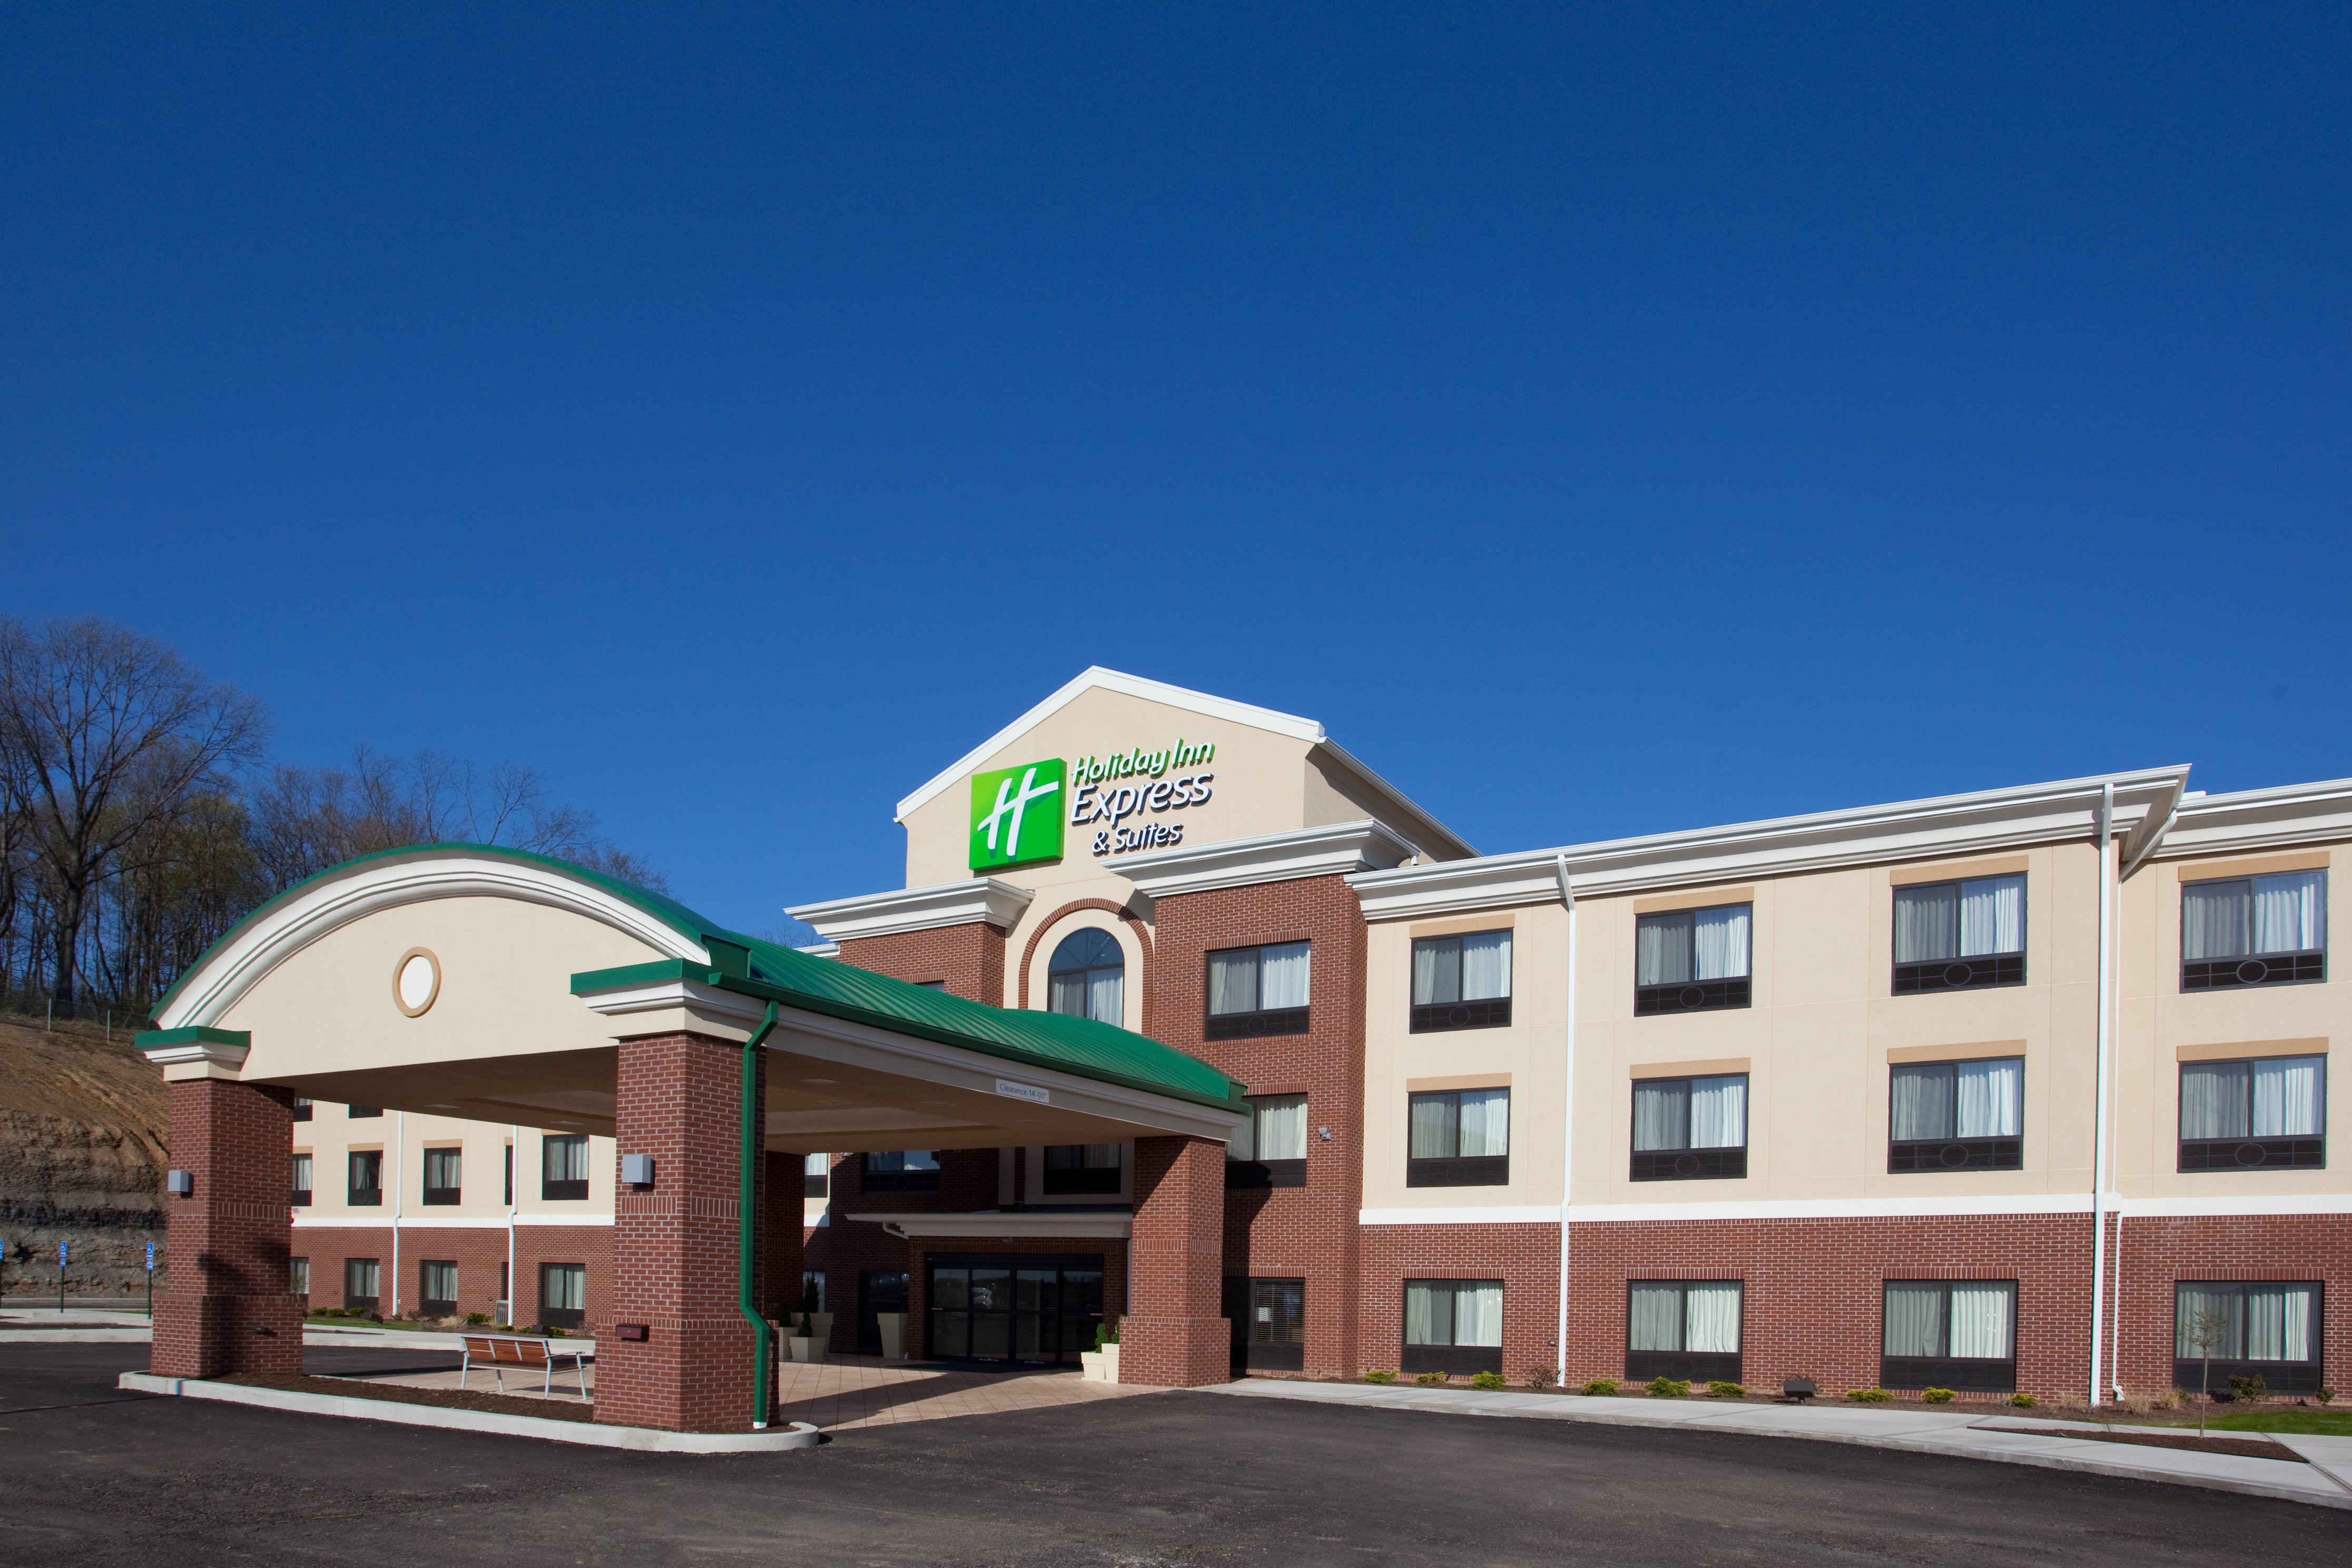 Welcome to Holiday Inn Express & Suites Zanesville North!